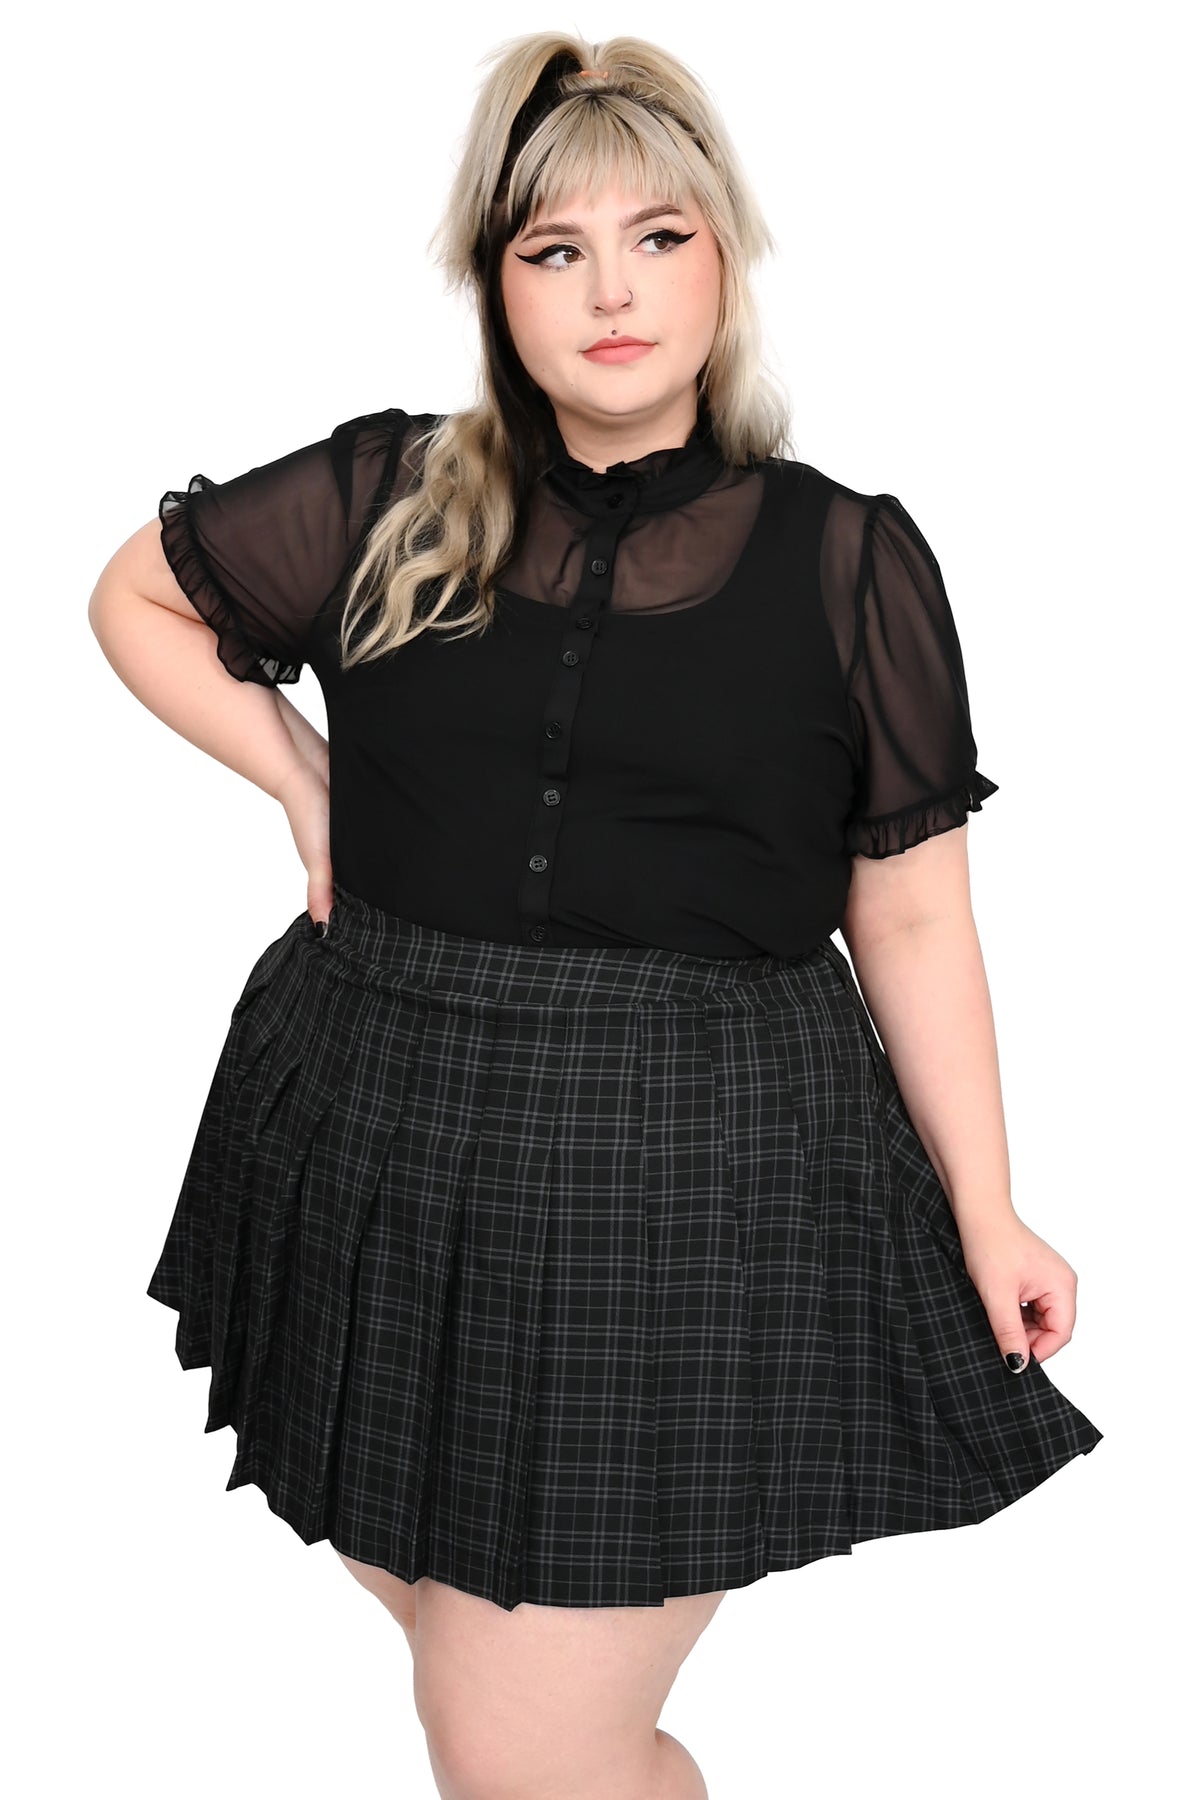 Dark Academy Pleated Skirt with Shorts - Sizes S+M left!